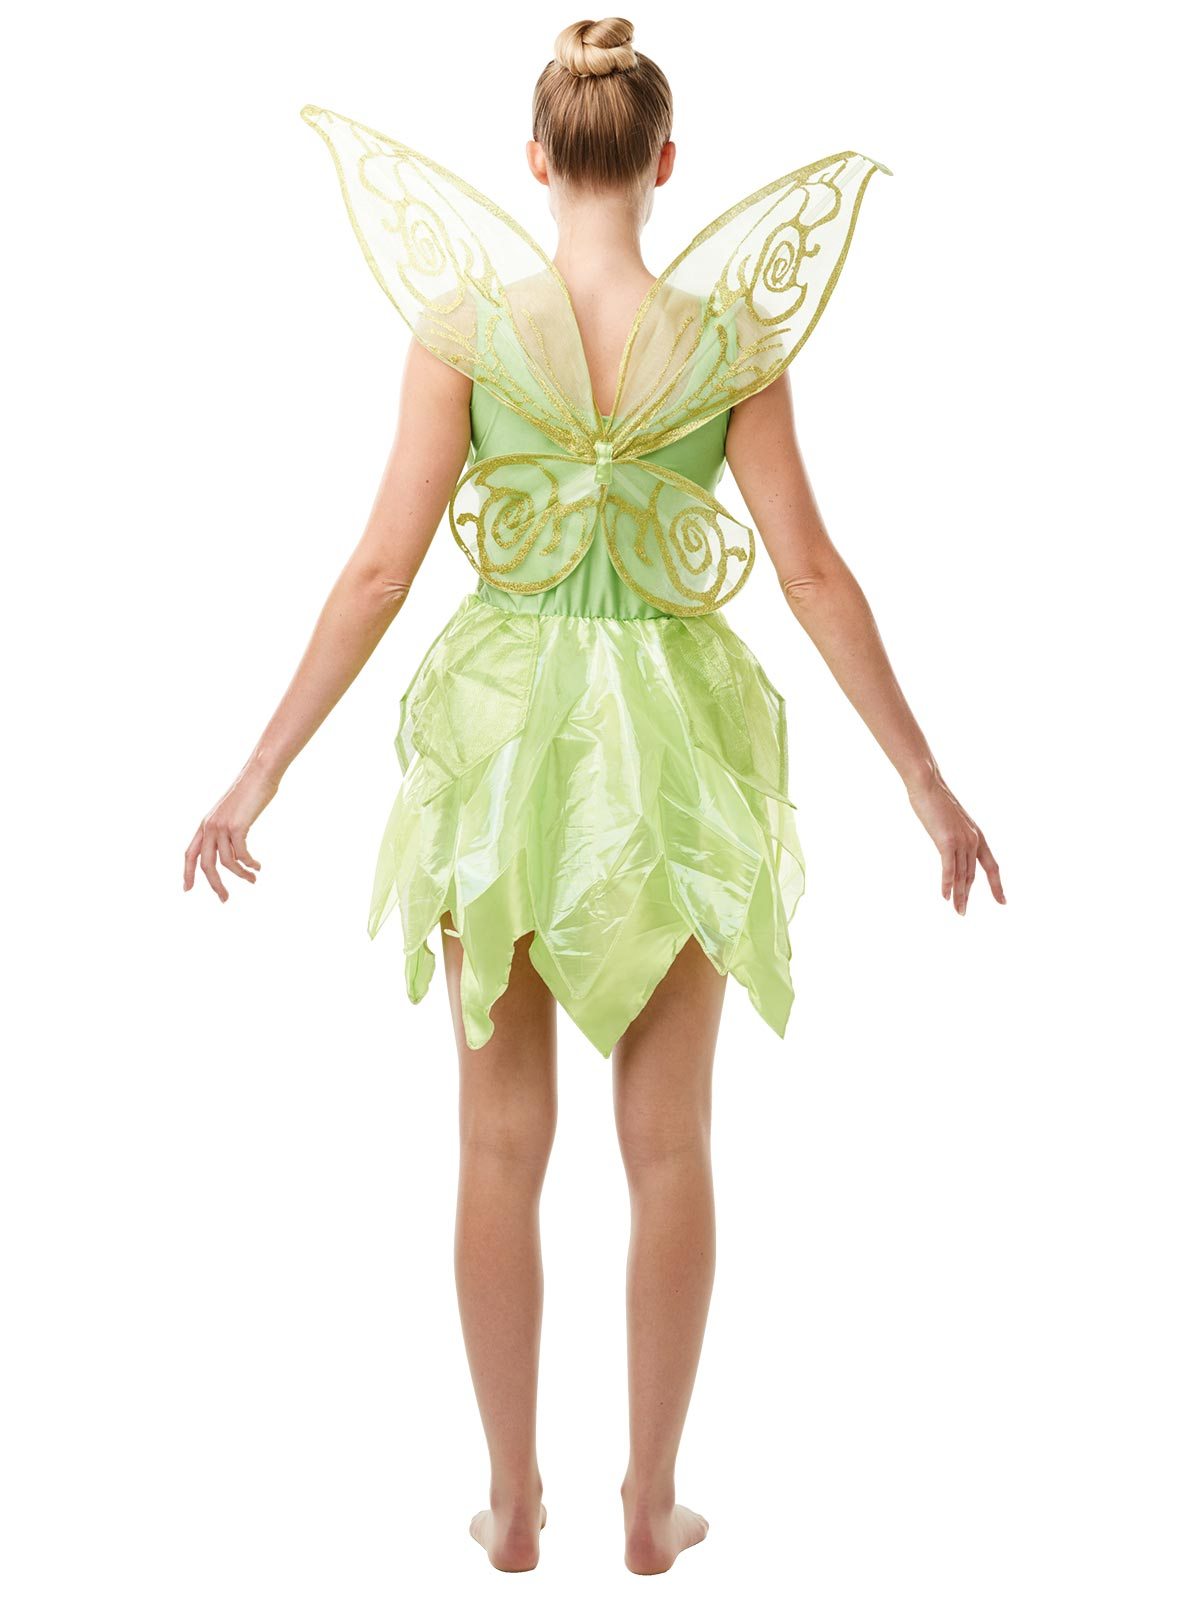 Costume Adult Tinkerbell Fairy Dress & Wings Large